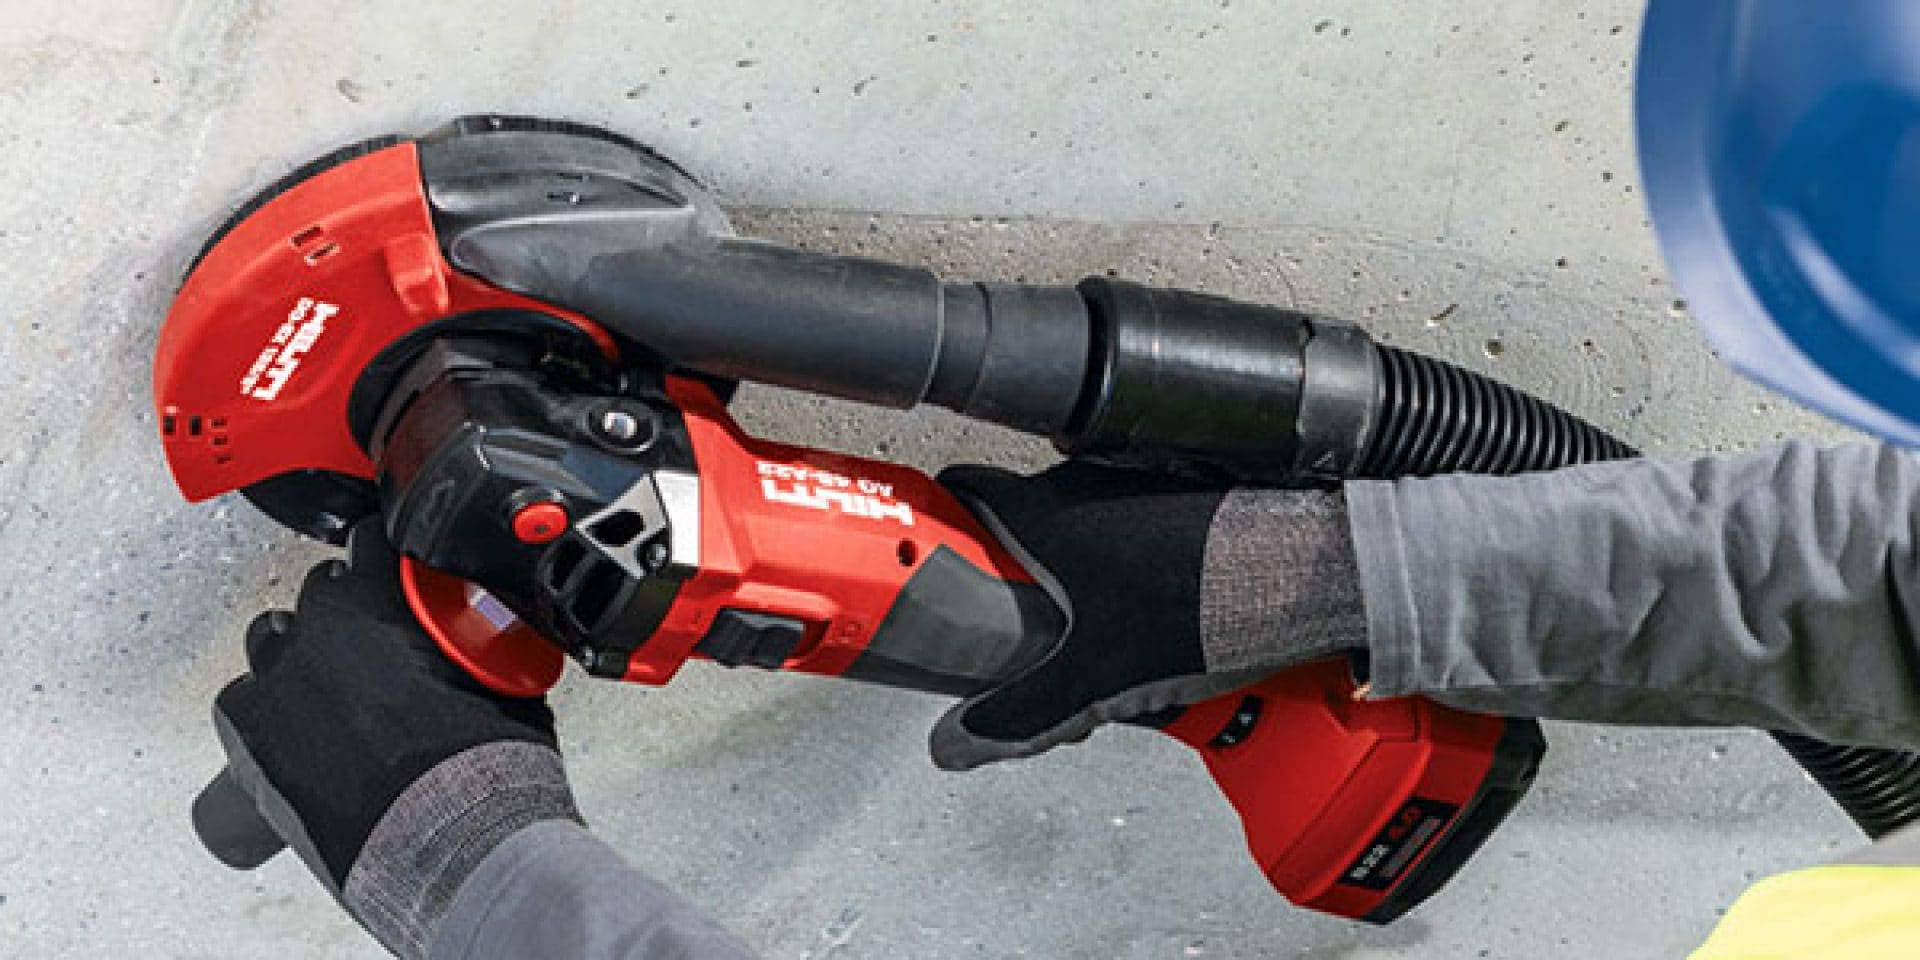 Compact and balanced design with the AG 4S-A22 cordless angle grinder